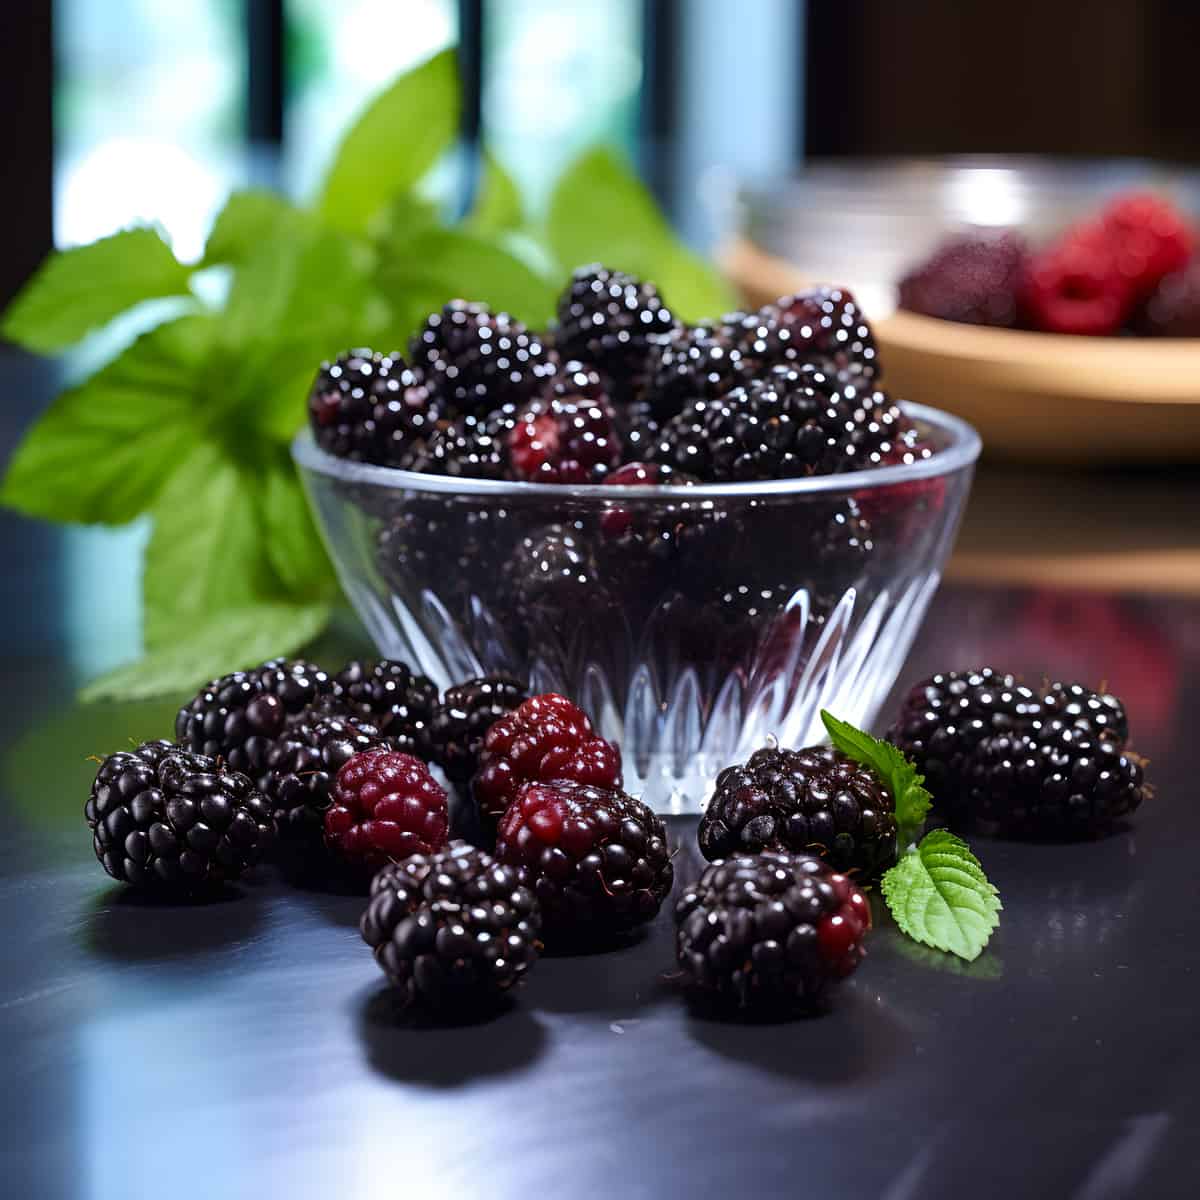 Boysenberries on a kitchen counter